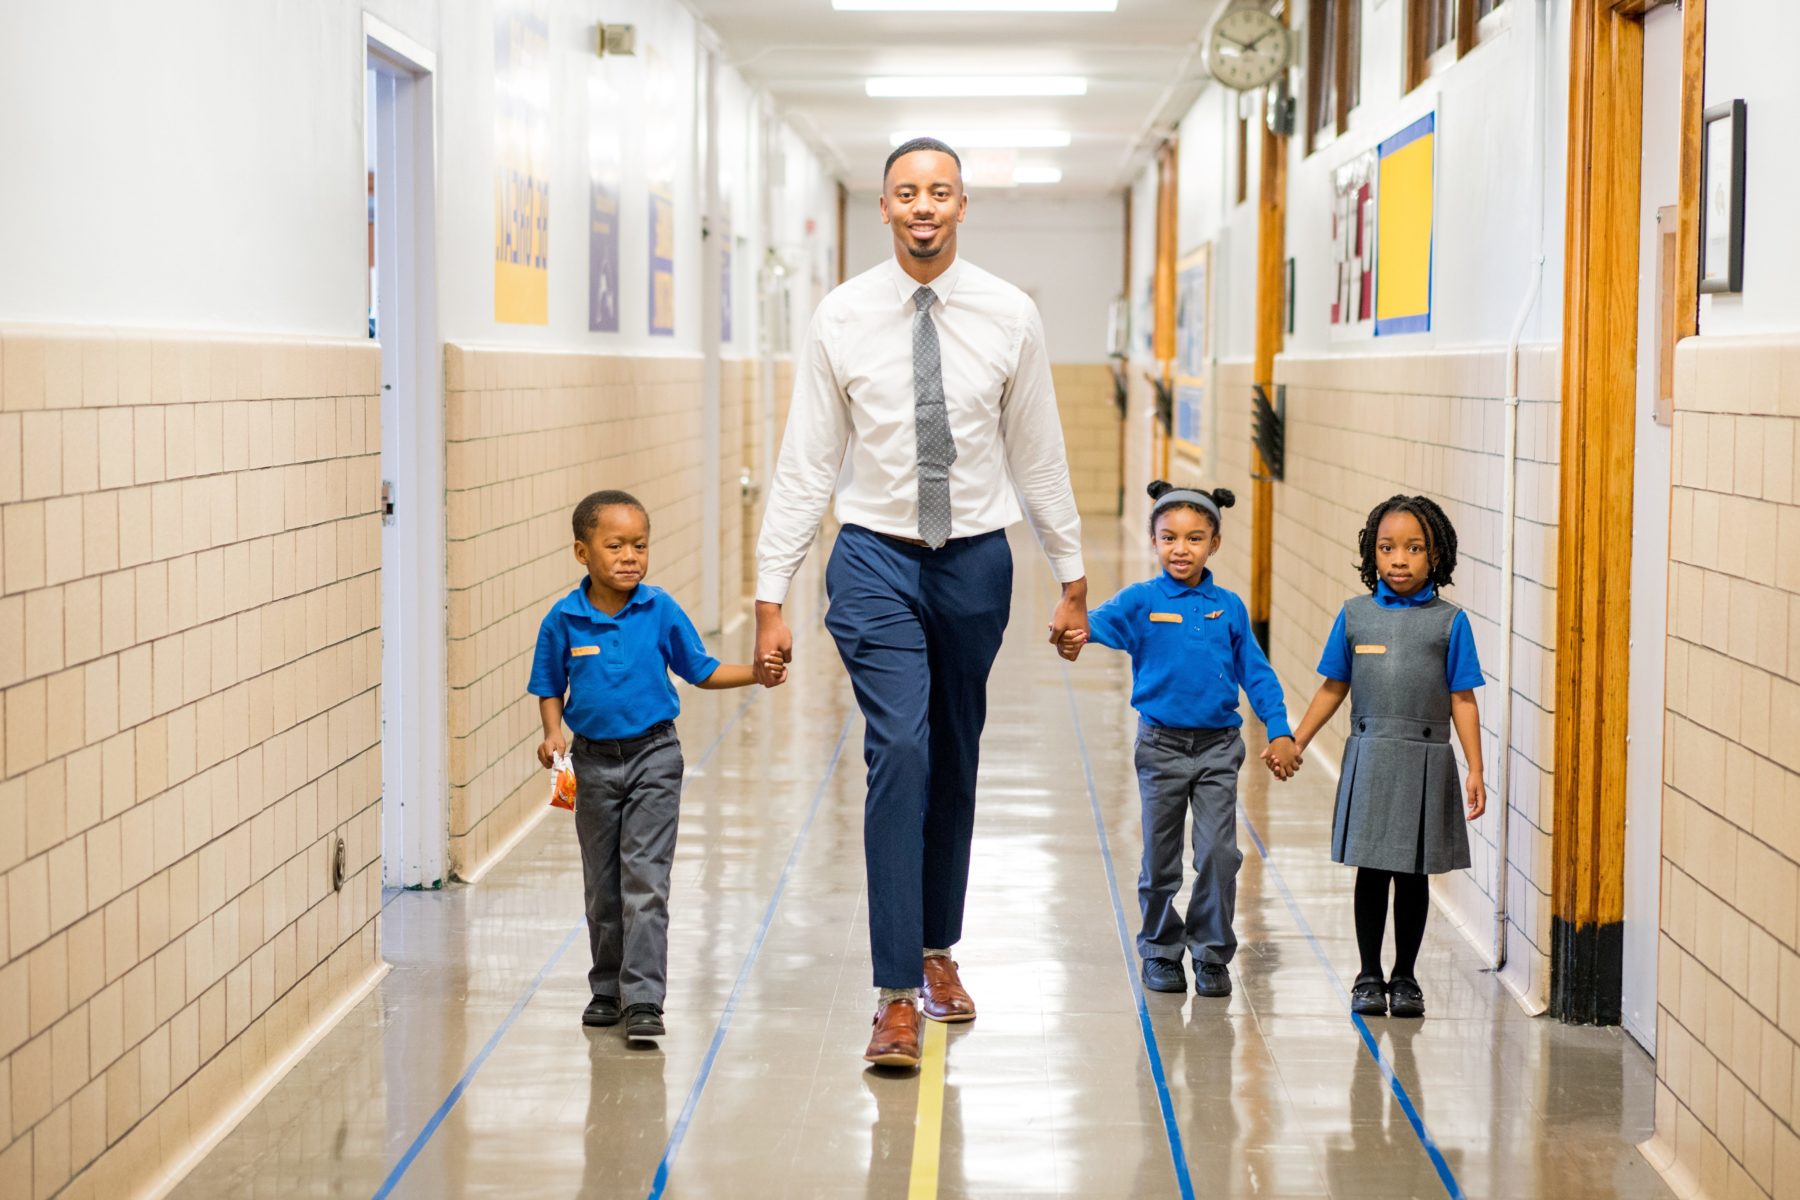 Man holding hands with young children walking down a hallway